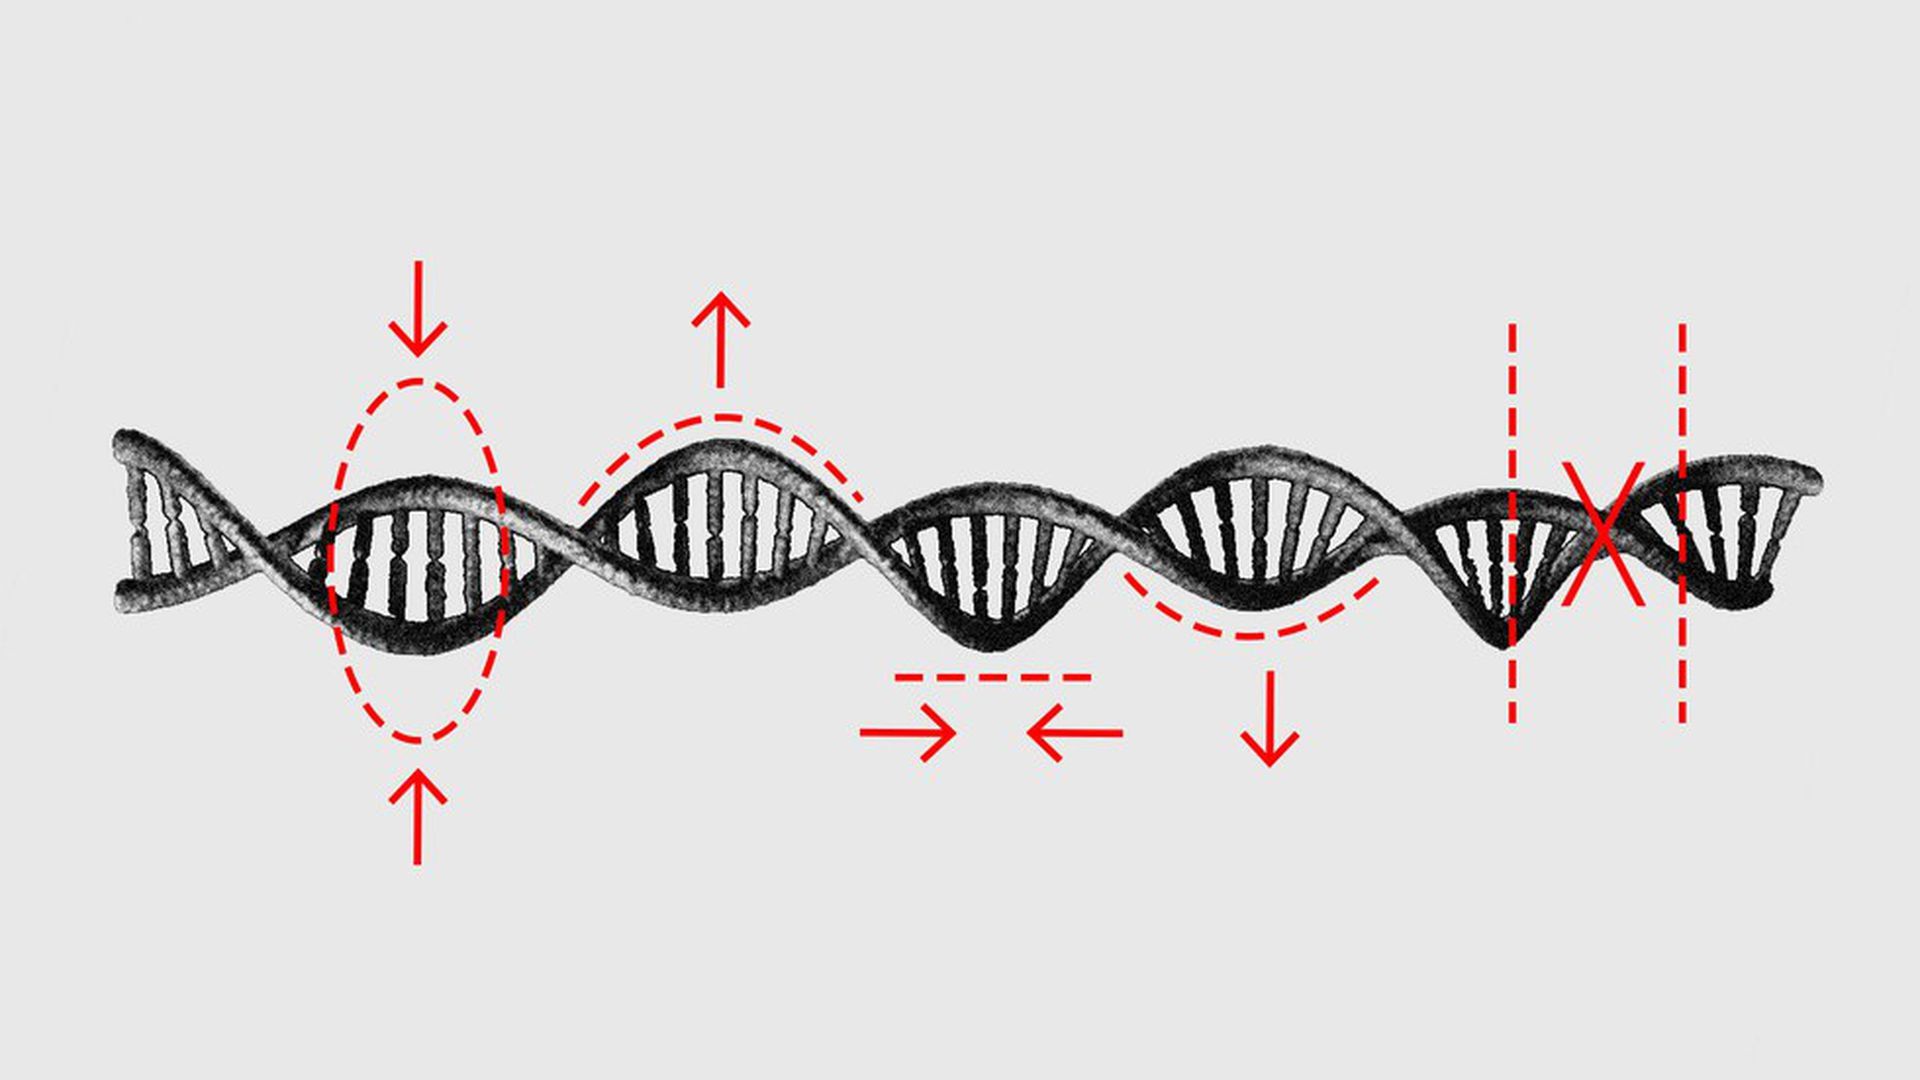 Illustration of double helix DNA and red marks "editing" it.